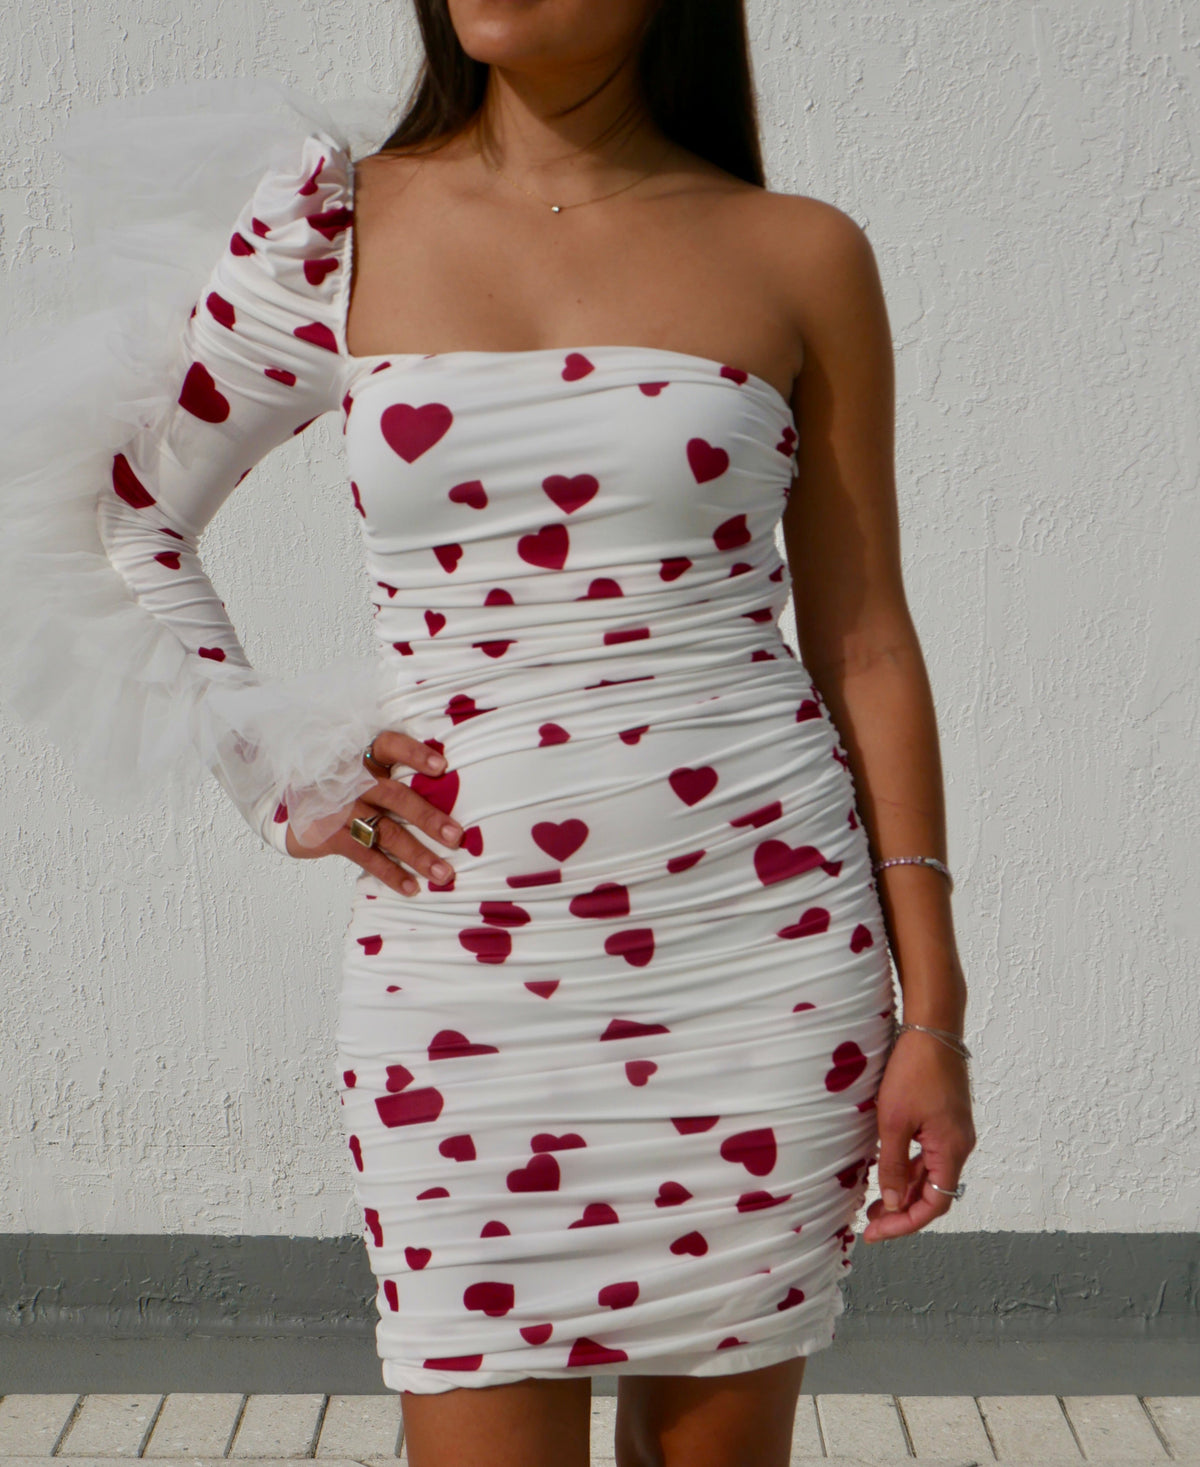 dresses, valentines dresses, valentines outfit ideas, cute dresses for valentines, white party outfit, white party dress, white dresses white dress , white clothes, Valentine's dresses, Valentine's Day dress, sexy dresses , sexy dress, party dresses fast shipping, party dresses, party dress, open back sexy dress, one sleeve dress, long sleeve dresses, heart print dresses, womens clothes with hearts, tiktok fashion, birthday gifts, anniversary gifts, cool fashion, popular dresses